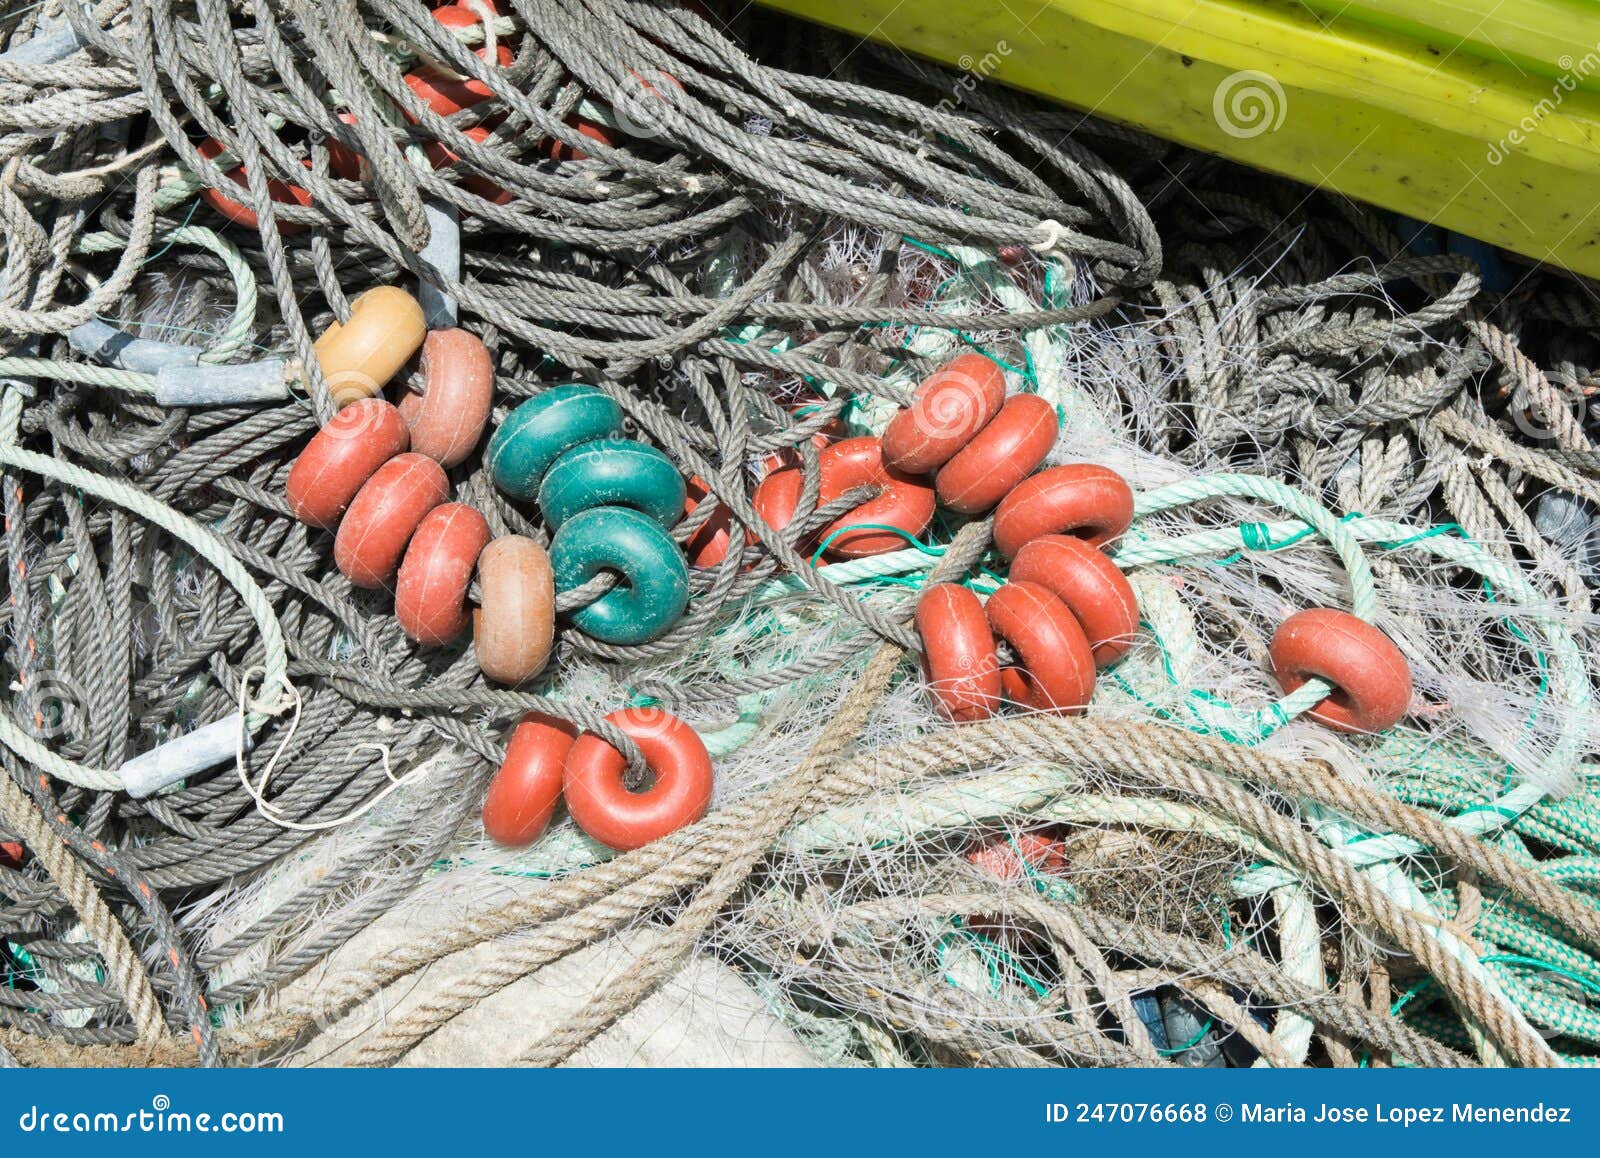 Used Fishing Net with Colorful Pvc Floats Out of Water for Repair